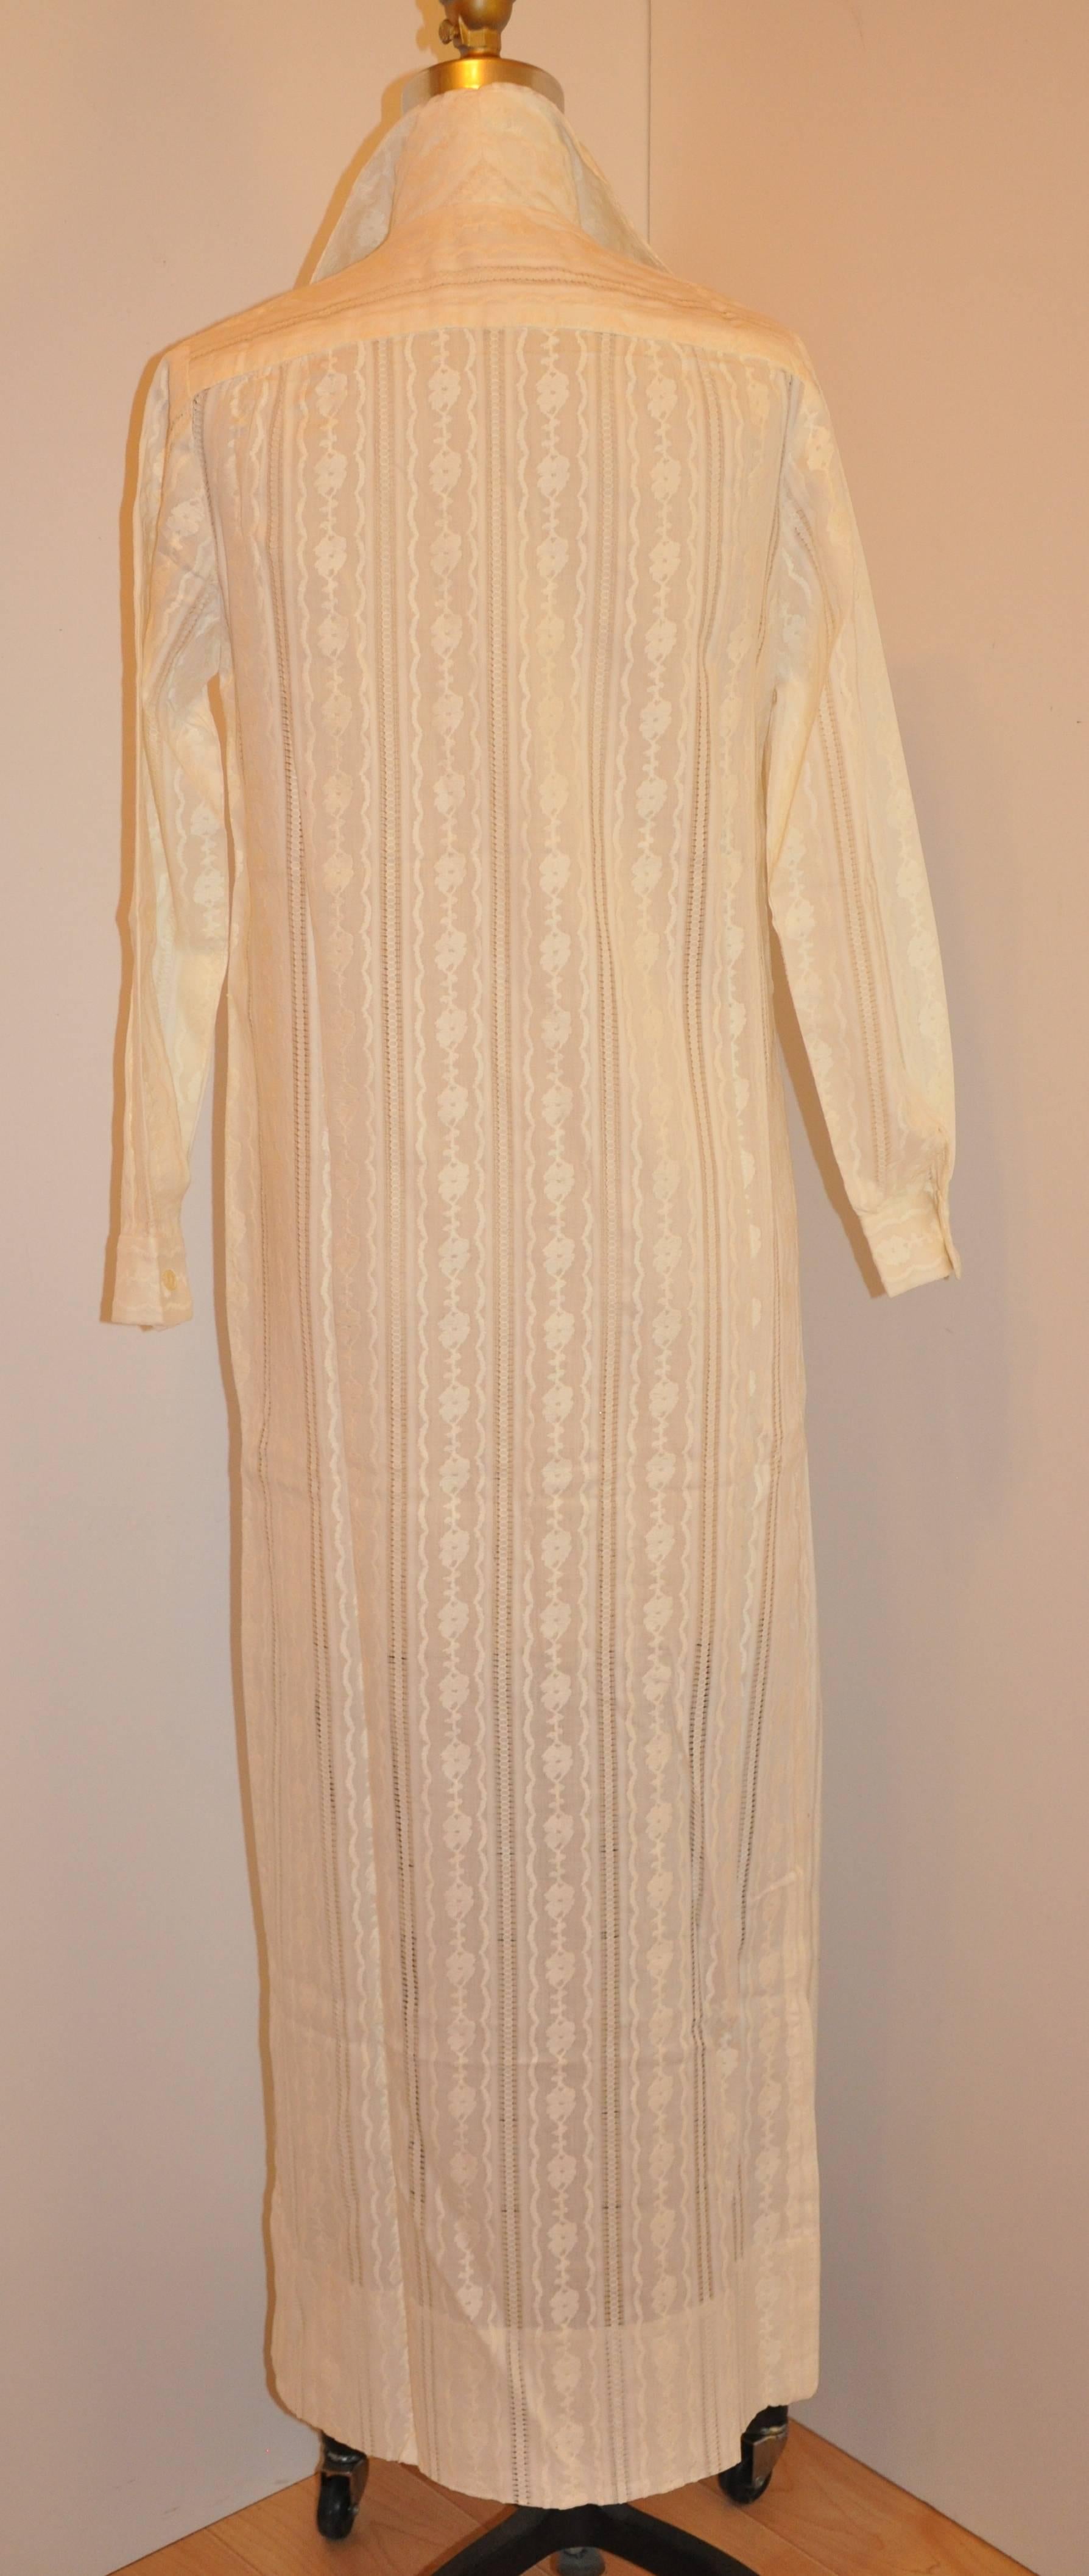        This wonderfully detailed ivory cotton of embroidered & eyelet combination can double as either a maxi dress or as a maxi spring or summer coat. There are two high slits measuring 14 1/2" on both sides. The ten-button front are